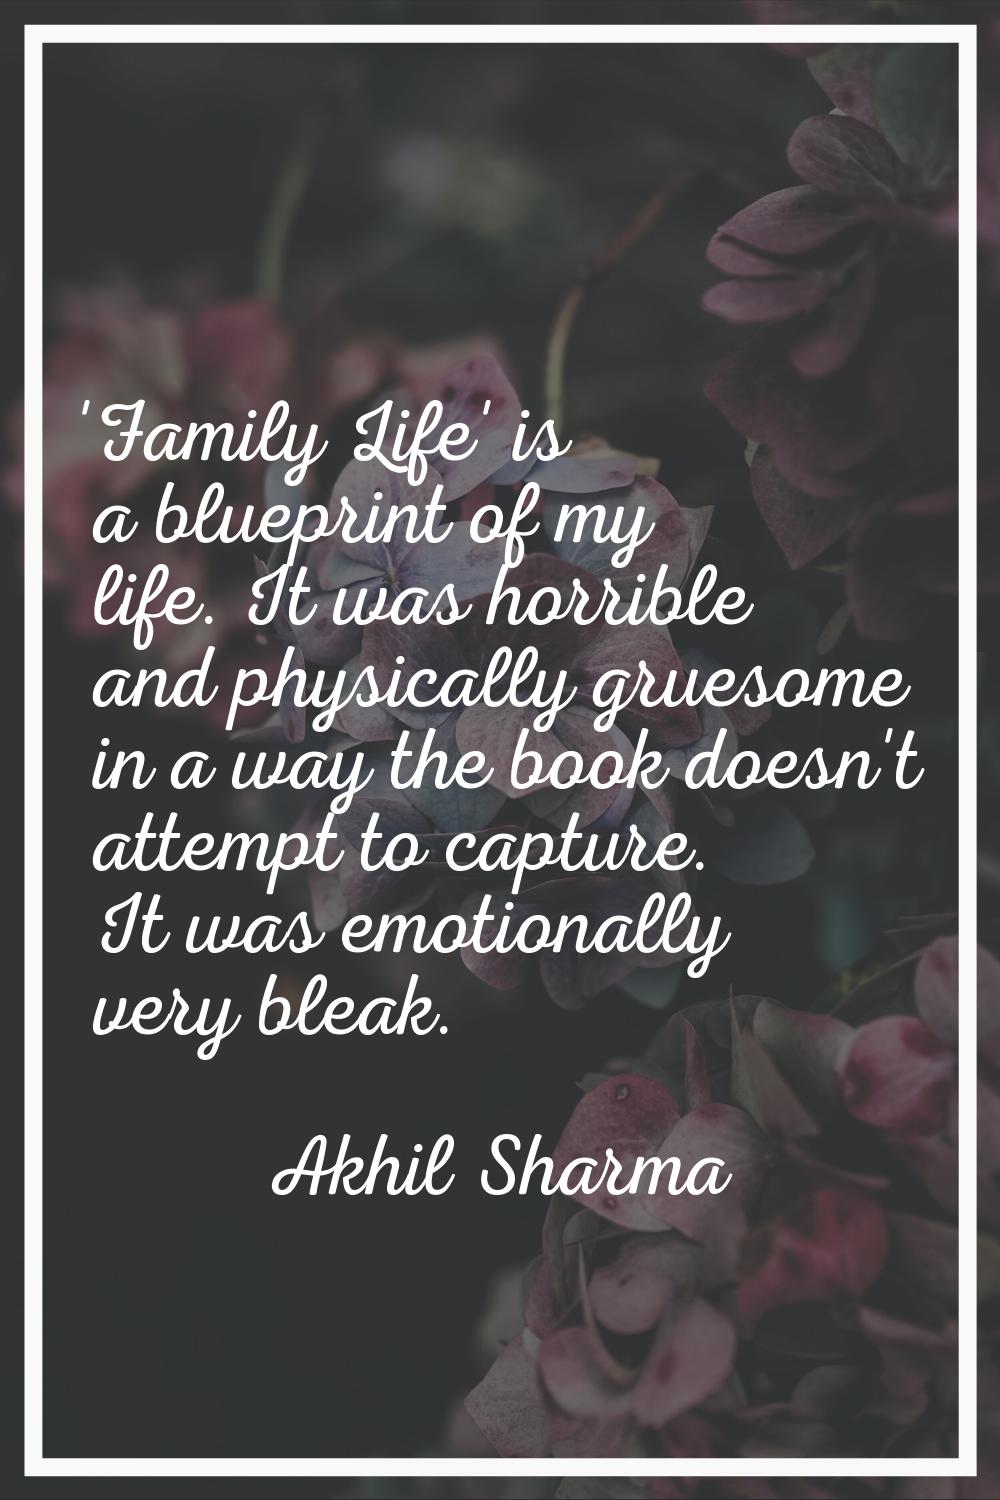 'Family Life' is a blueprint of my life. It was horrible and physically gruesome in a way the book 